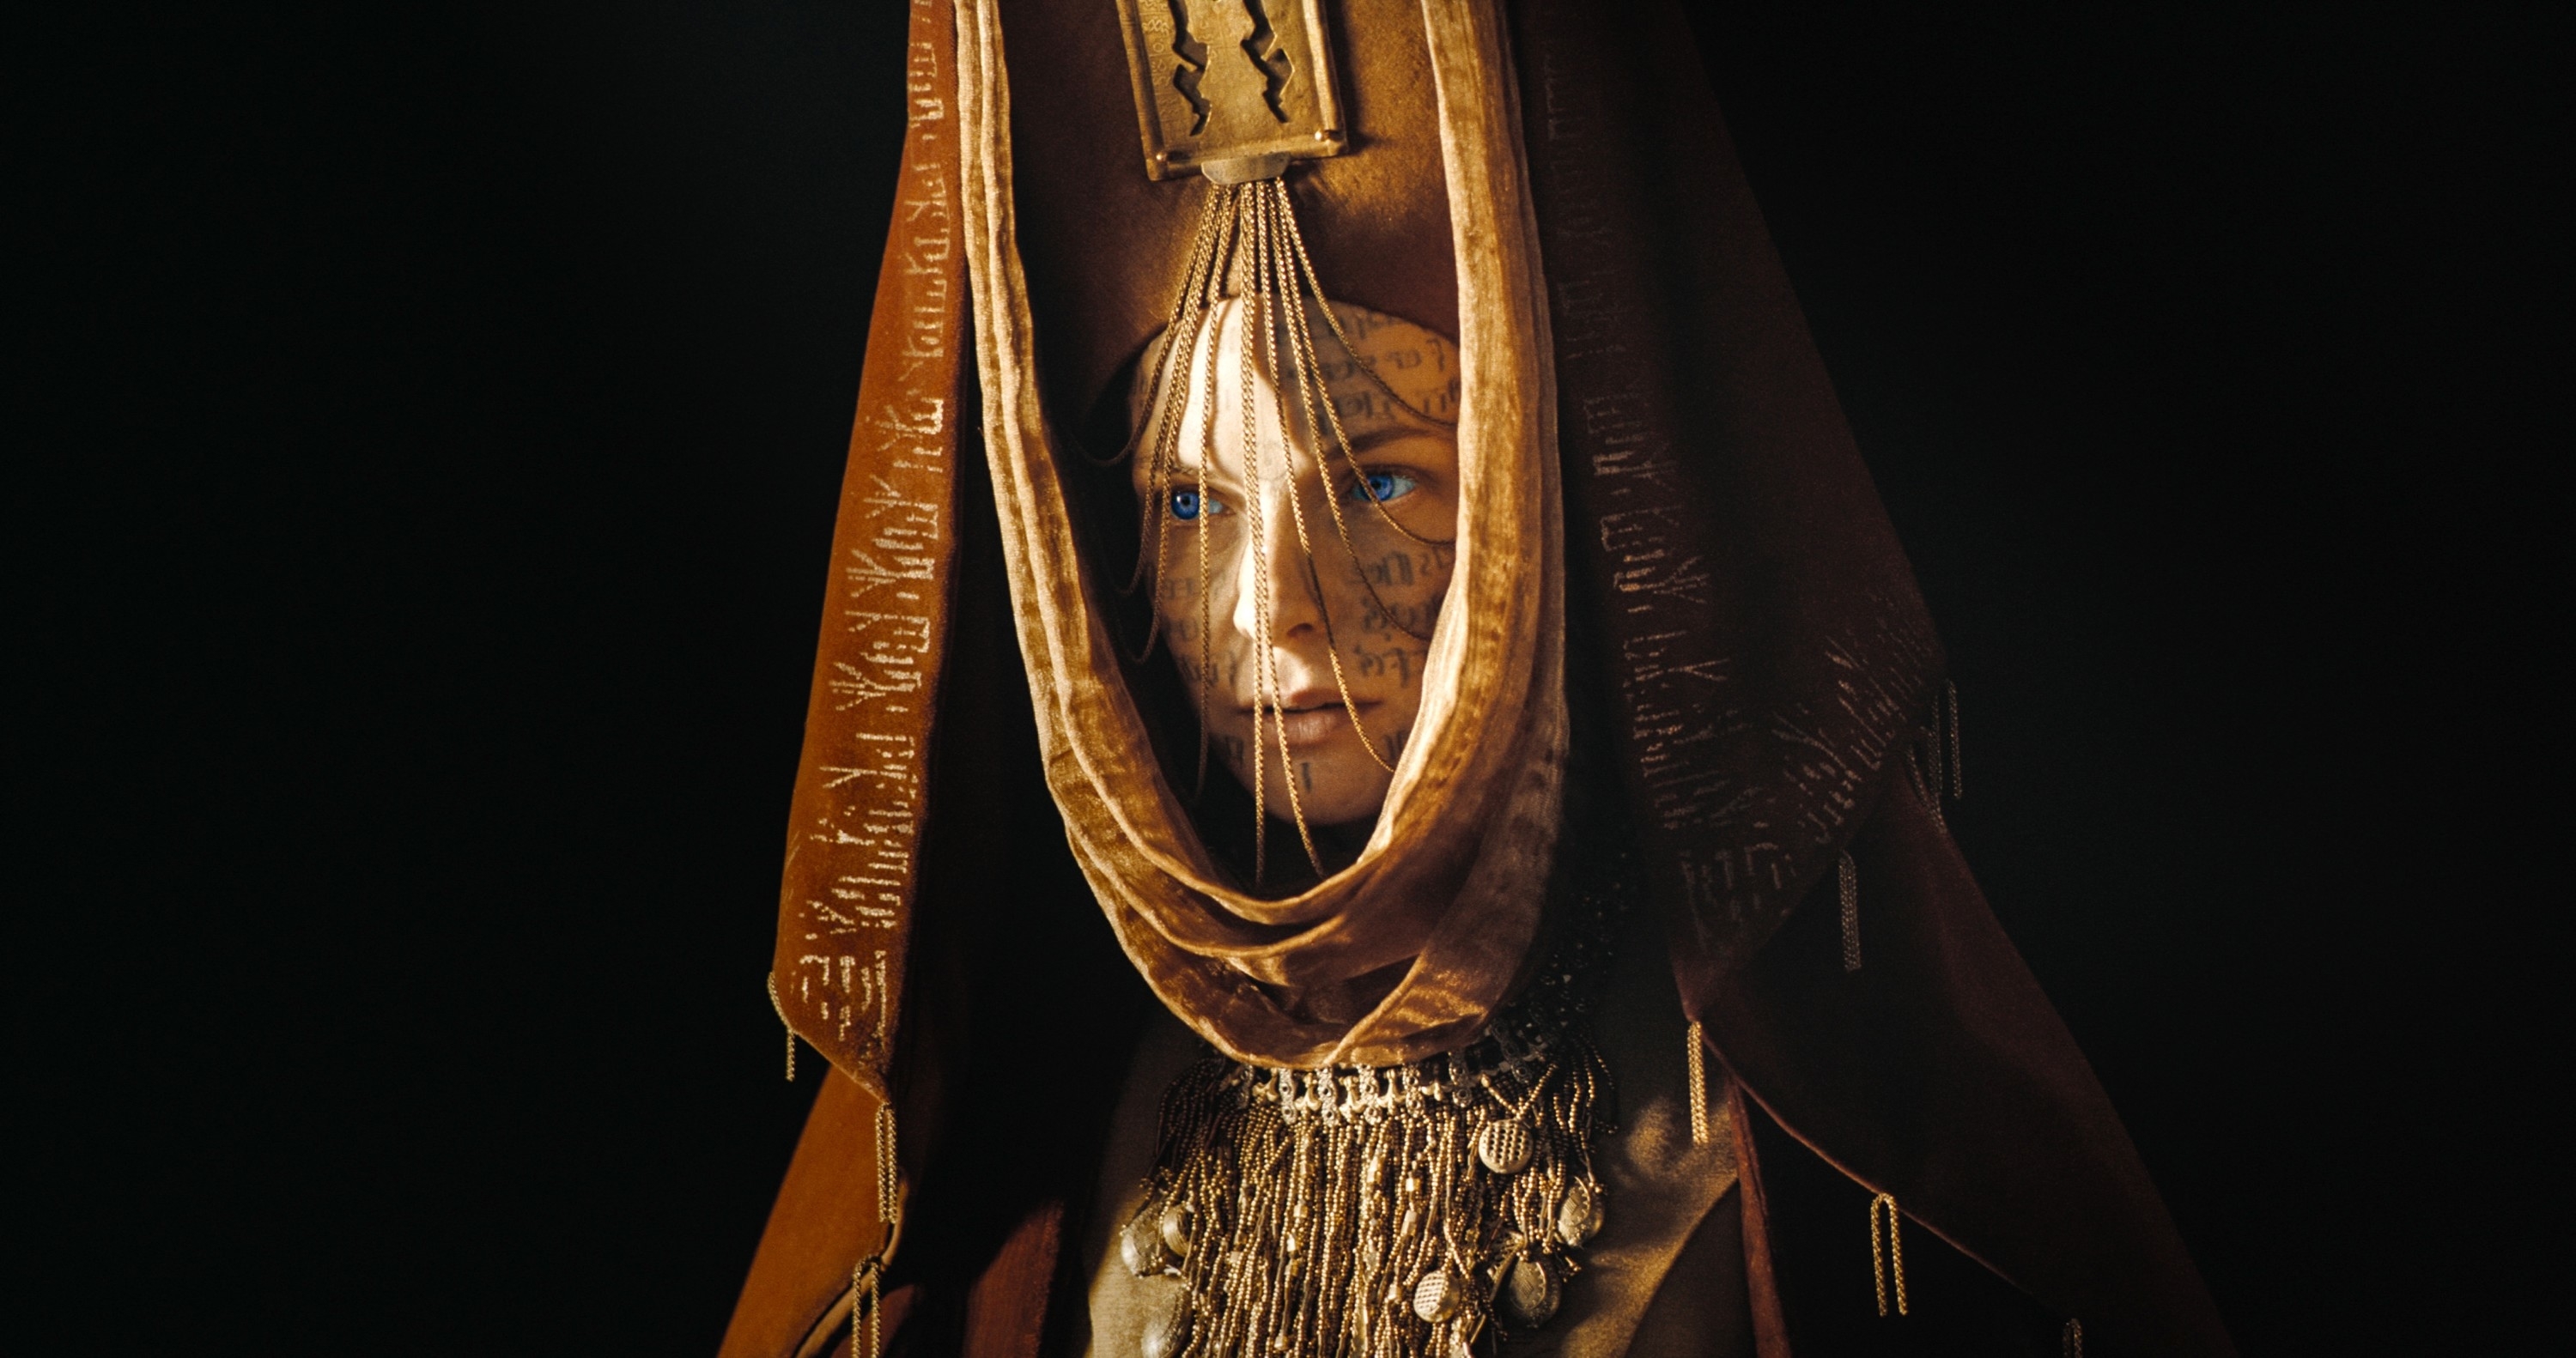 Rebecca as Lady Jessica in an ornate costume with facial tattoos, draped in a hooded cloak, from the TV show